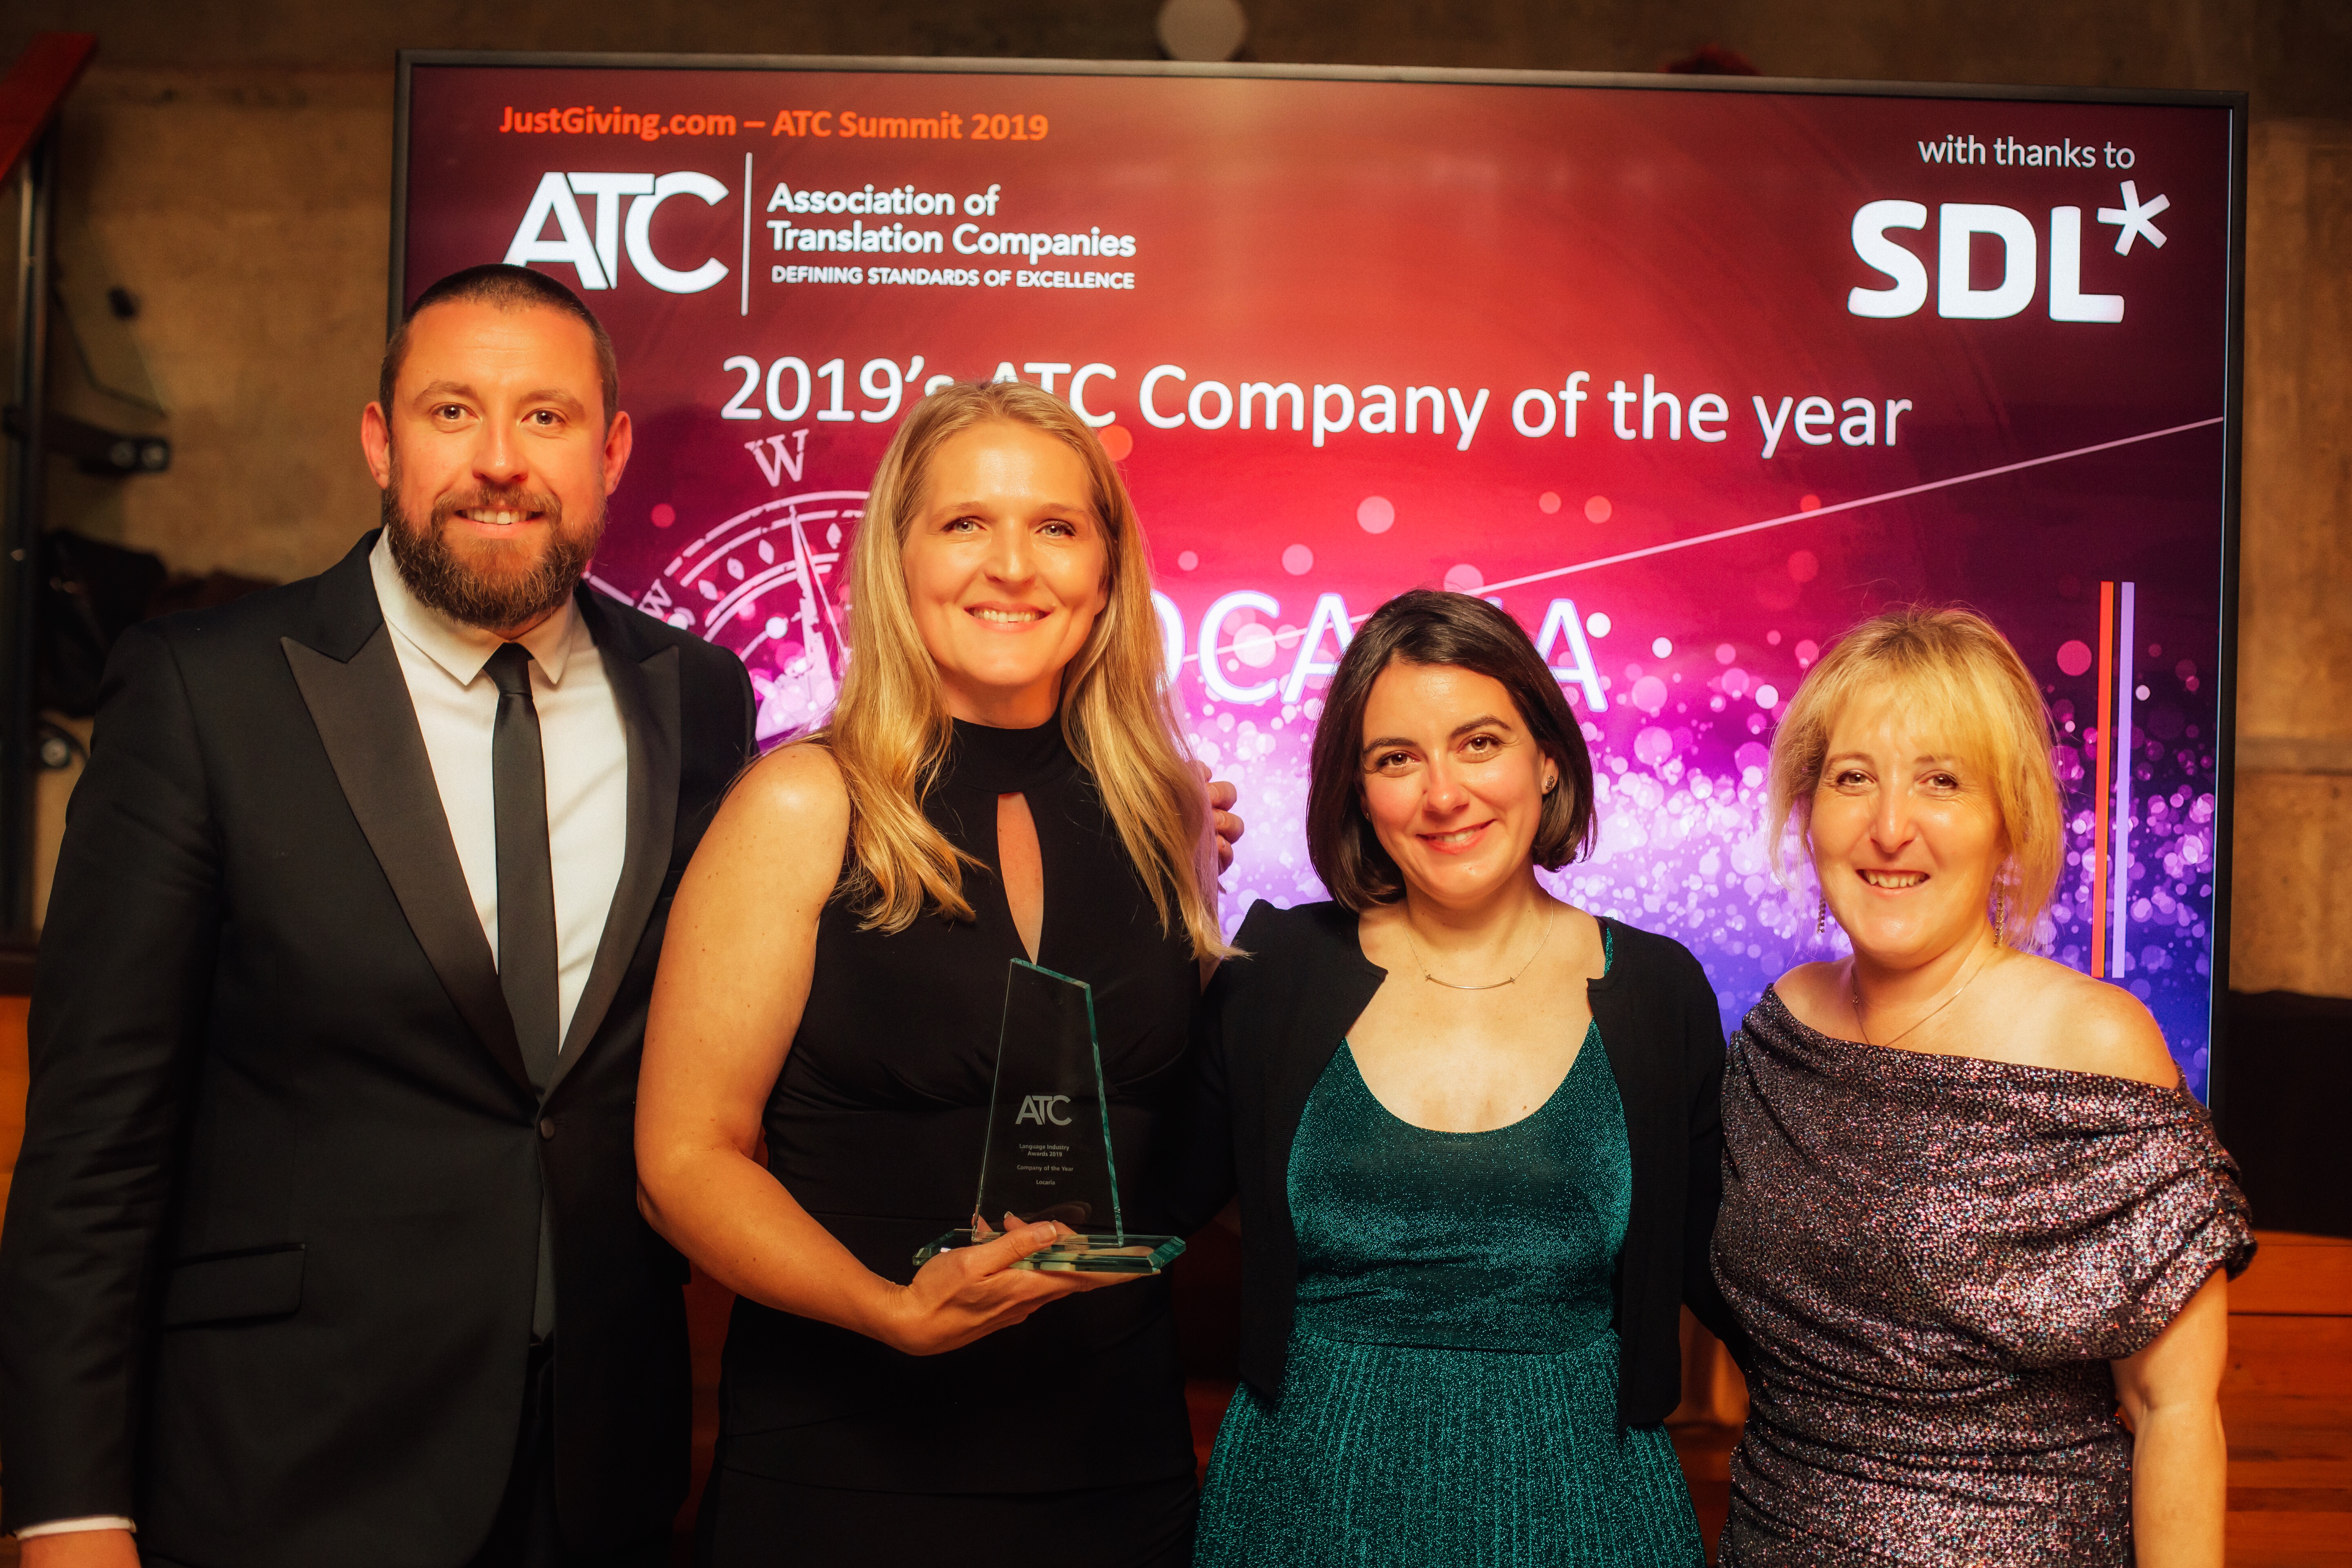 Locaria awarded Company of the Year by the ATC